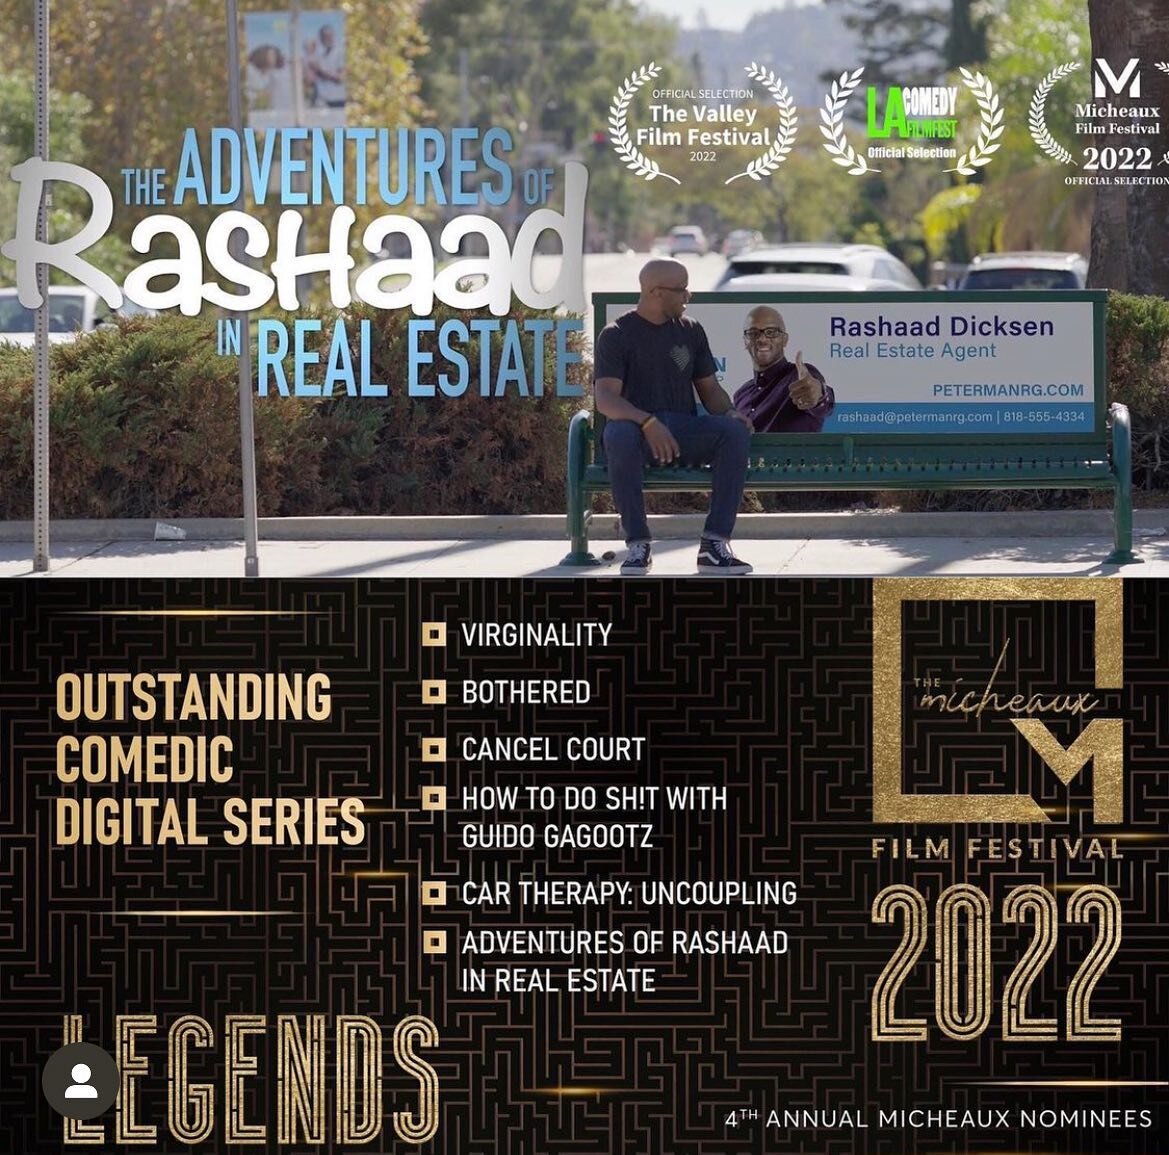 Finally! The live premiere of Rashaad Real Estate is tonight at the Michaeux Film Festival at LA Live, and I am so honored for it be nominated for Outstanding Comedic Digital series and Rashaad himself is nominated for Best Actor in a Comedy!

We sta